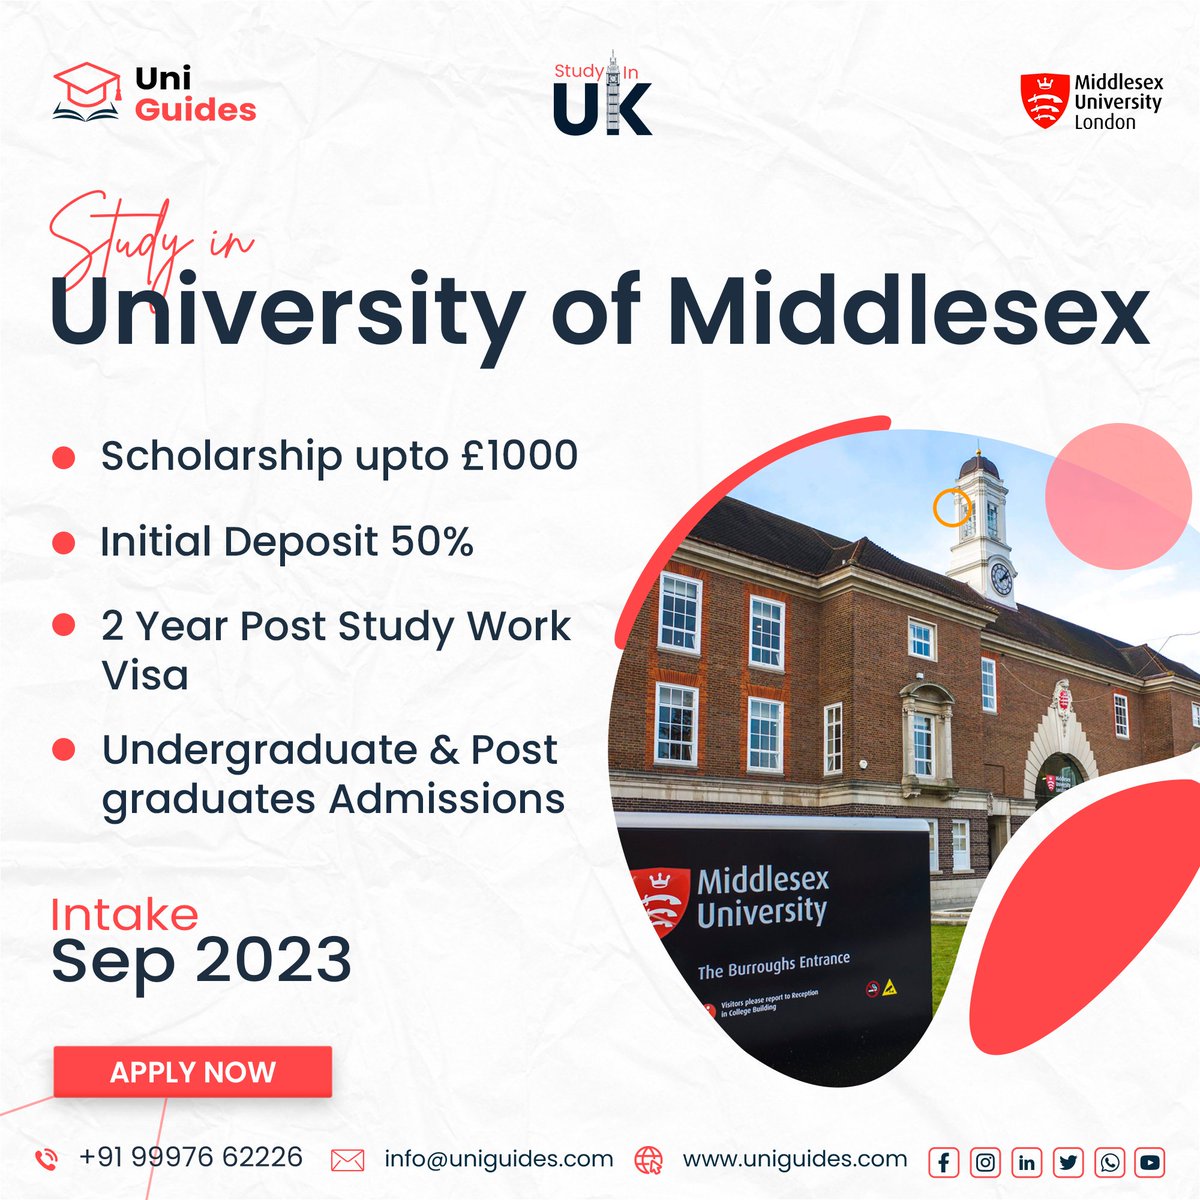 Ignite your academic journey at the University of Middlesex! 🎓
Discover a wide range of programs, innovative teaching methods, and a supportive learning environment.

📞 Call now: +91 99976 62226

#EducationConsultancy #UniversityOfMiddlesex #IgniteYourPotential #UniGuidesIndia